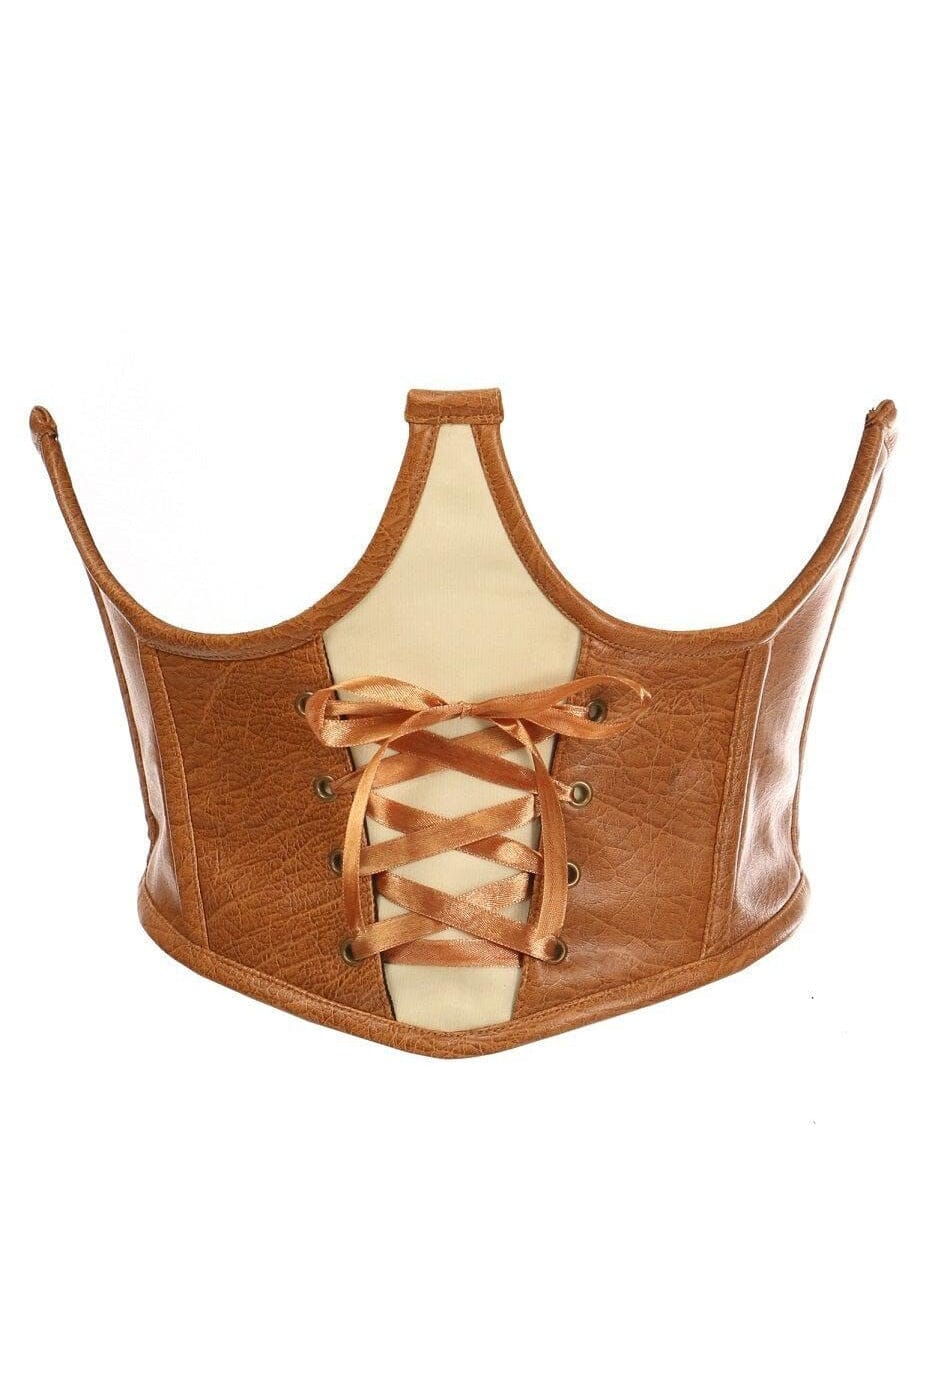 Top Drawer Faux Leather Steel Boned Lace-Up Open Cup Waist Cincher-Waist Cincher-Daisy Corsets-Brown-2X-SEXYSHOES.COM